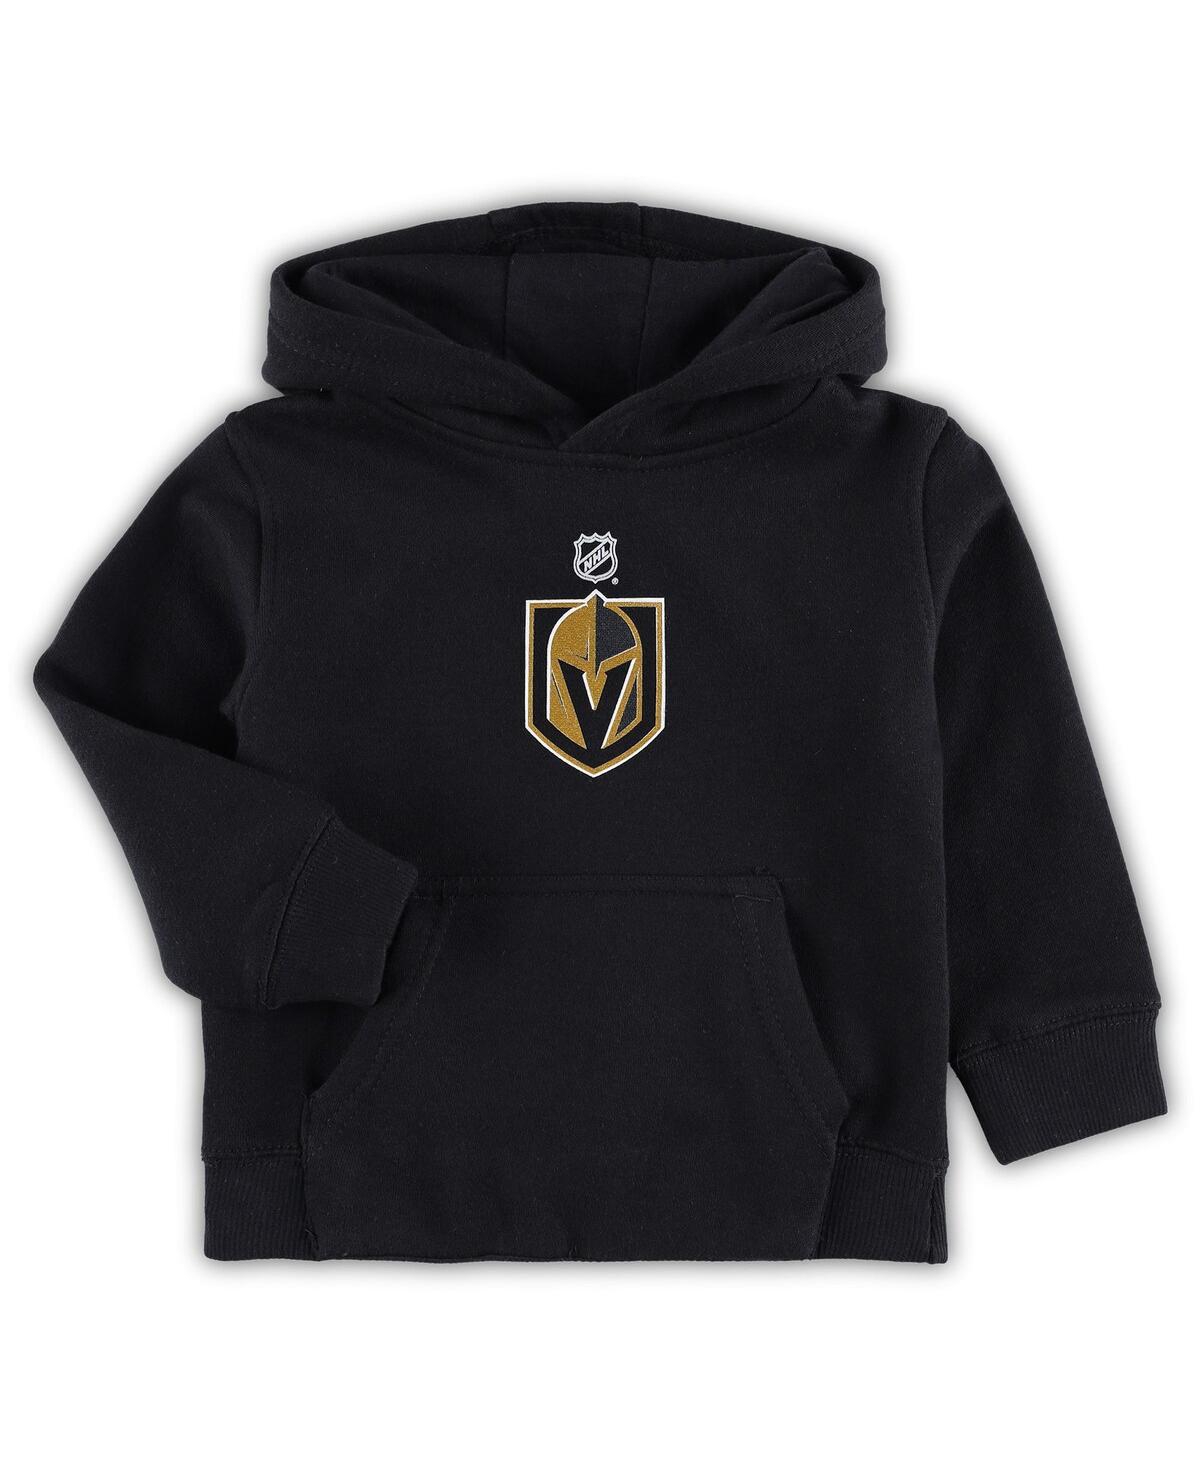 Outerstuff Babies' Toddler Boys Black Vegas Golden Knights Primary Logo Pullover Hoodie